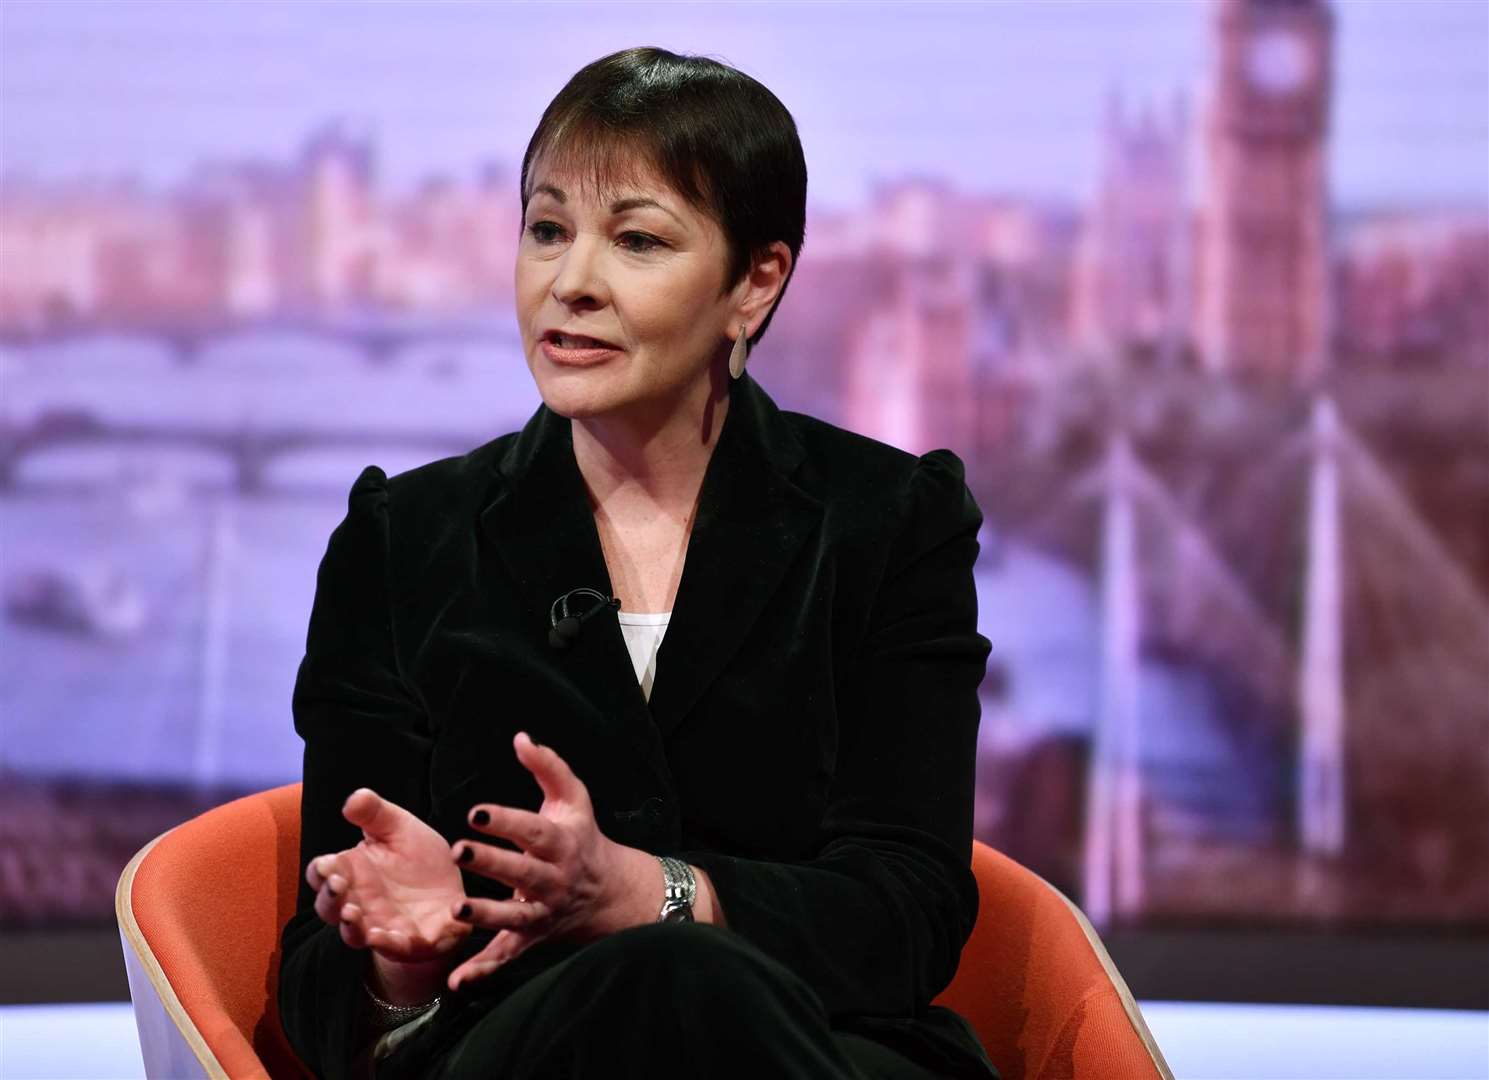 Green Party MP Caroline Lucas is among the signatories of the letter (Jeff Overs/PA)